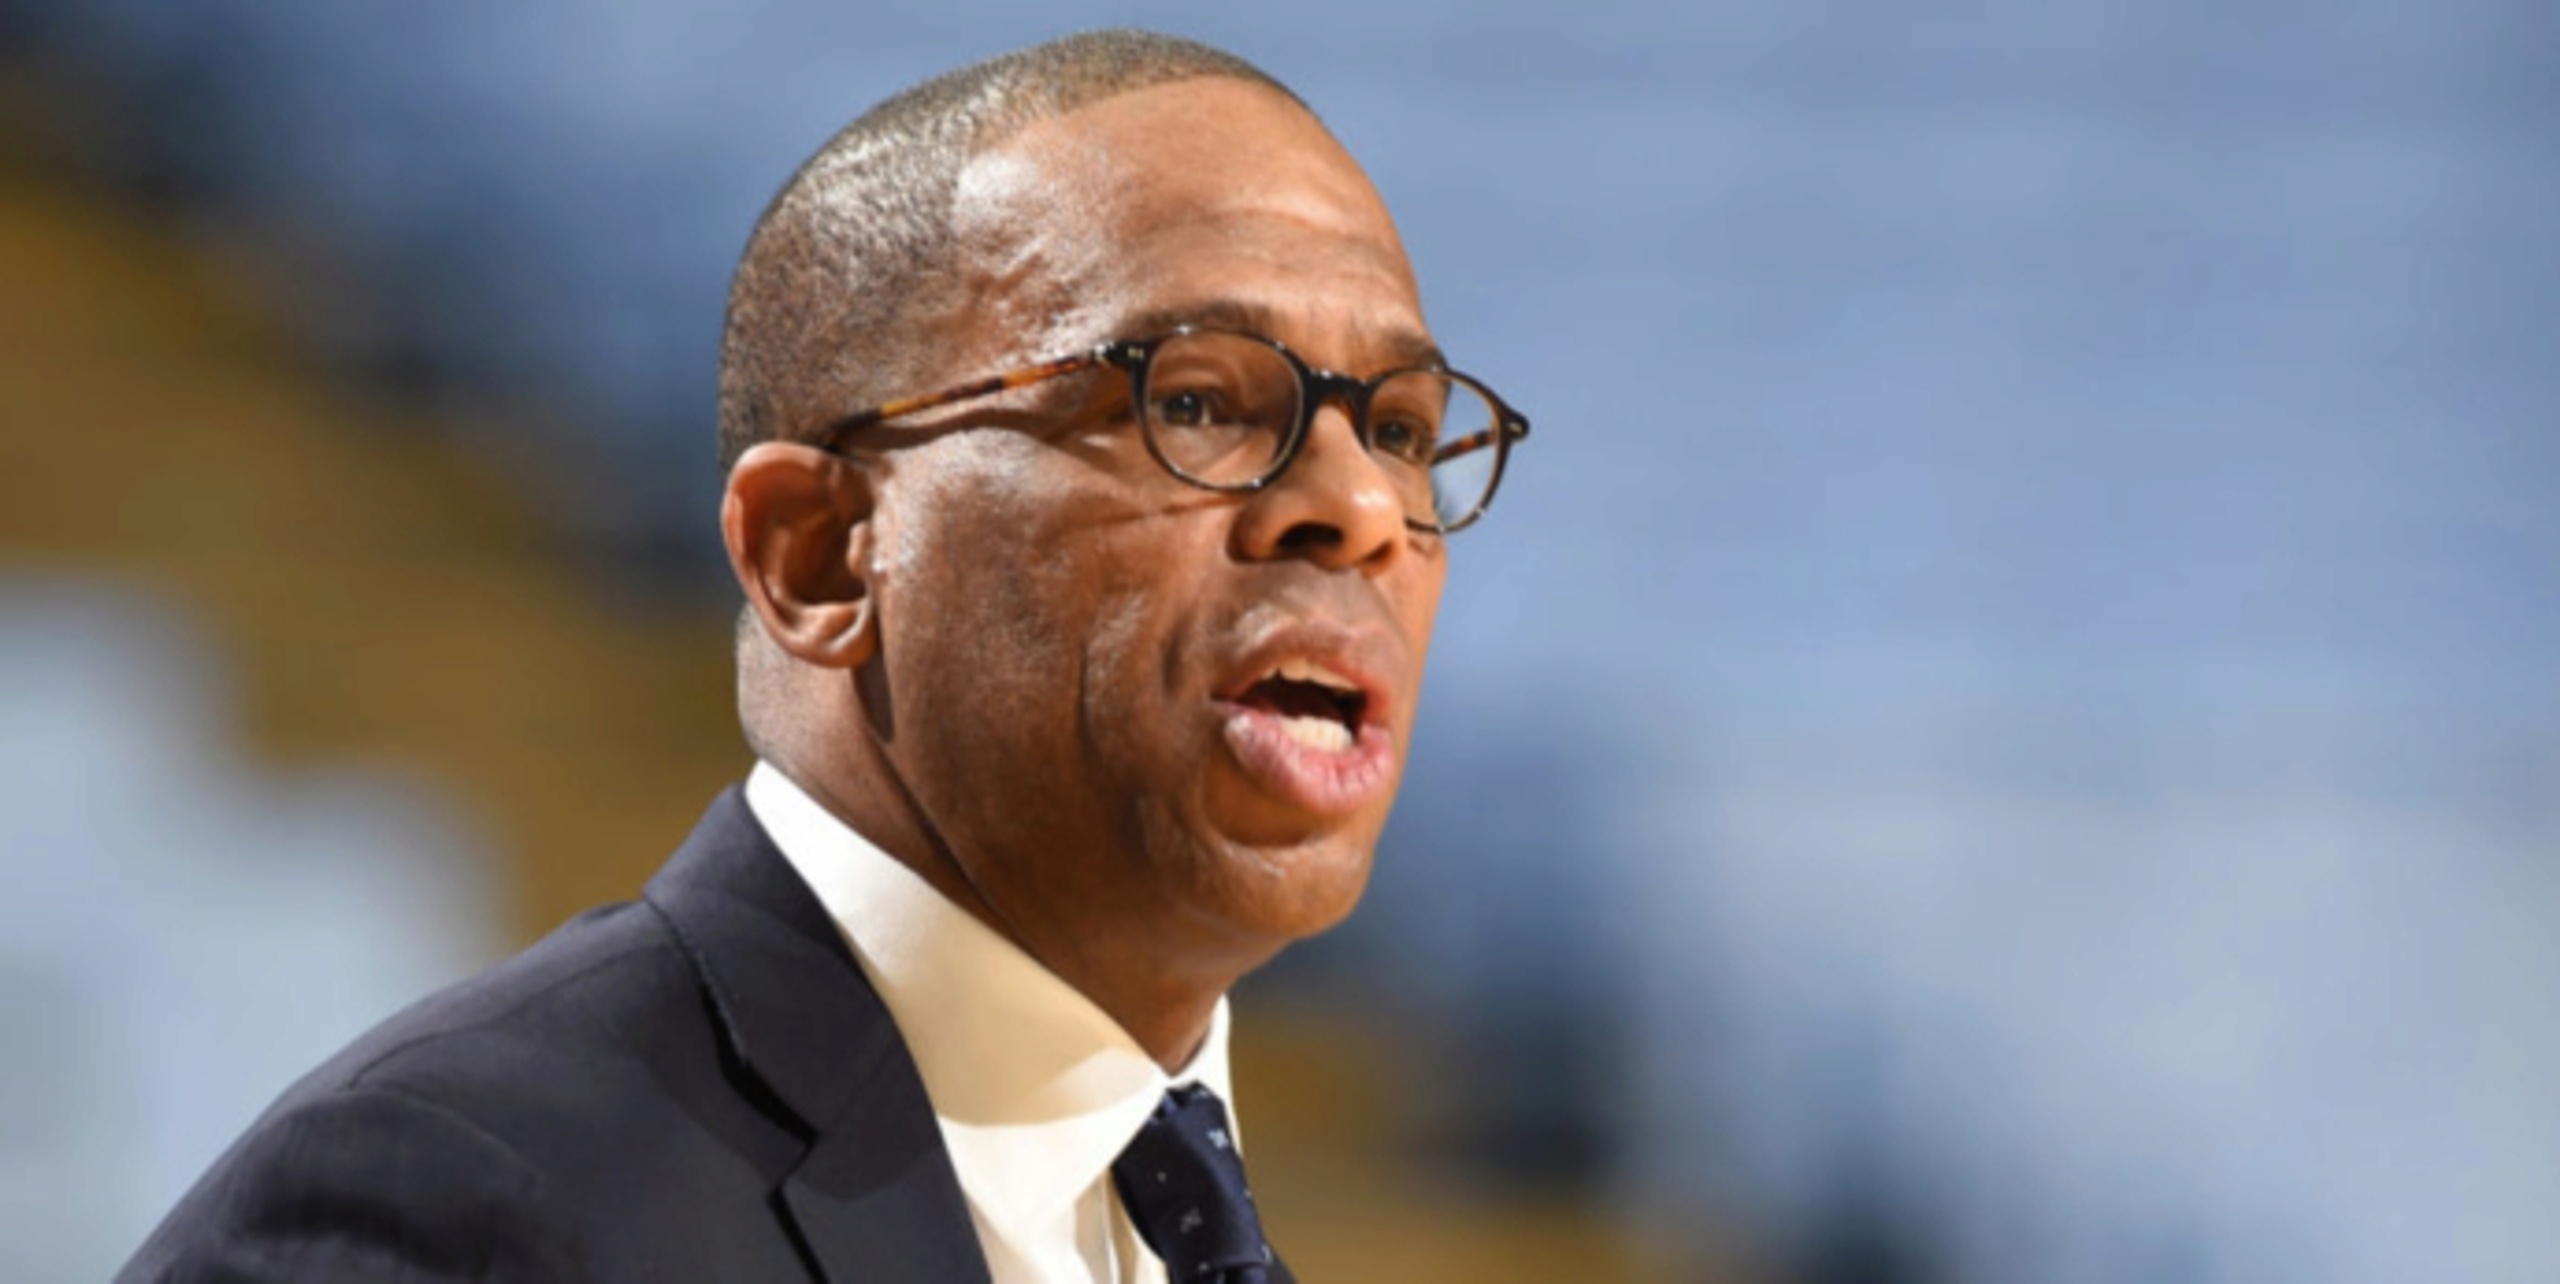 An open discussion on Hubert Davis’ eyebrow-raising 'white wife' comment